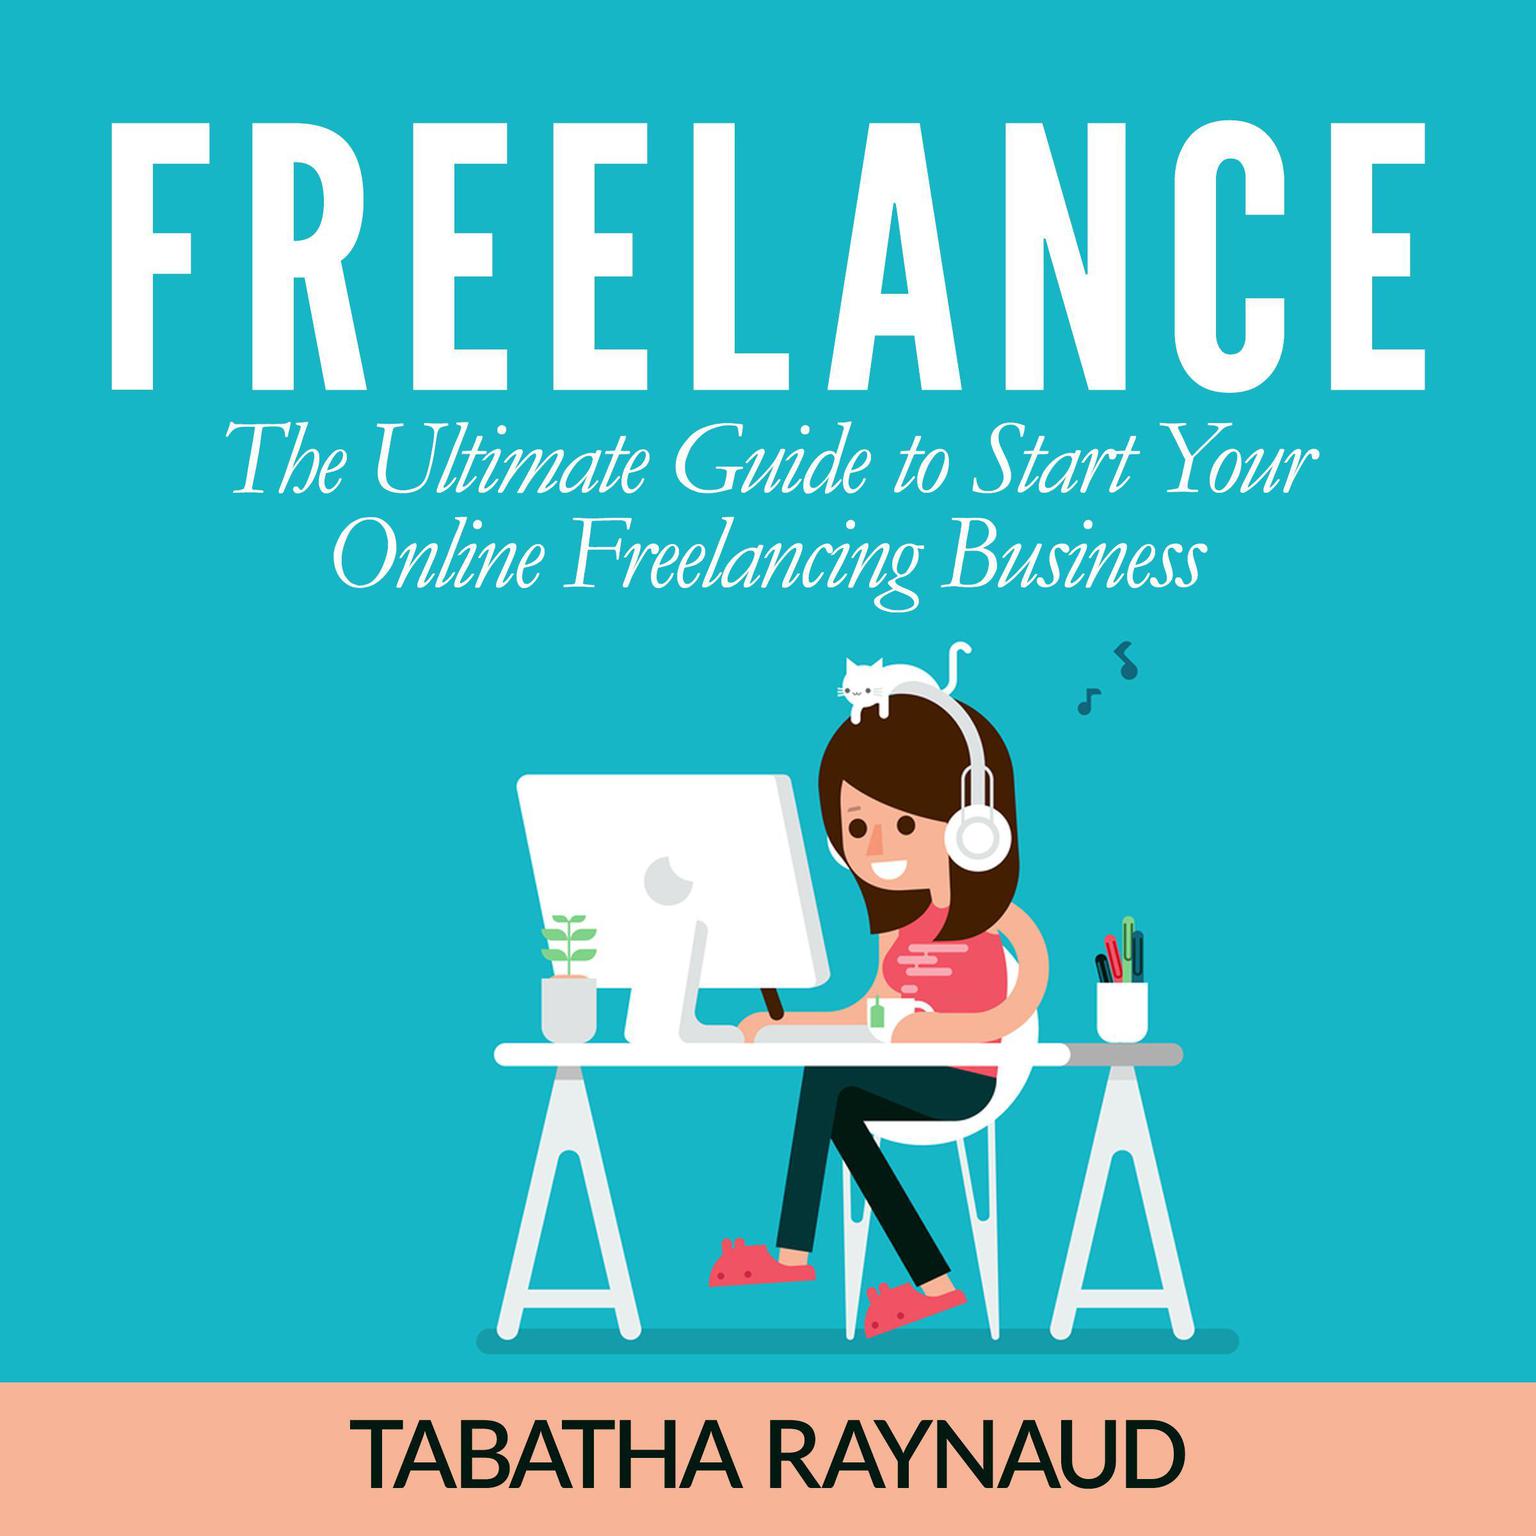 Freelance: The Ultimate Guide to Start Your Online Freelancing Business Audiobook, by Tabatha Raynaud